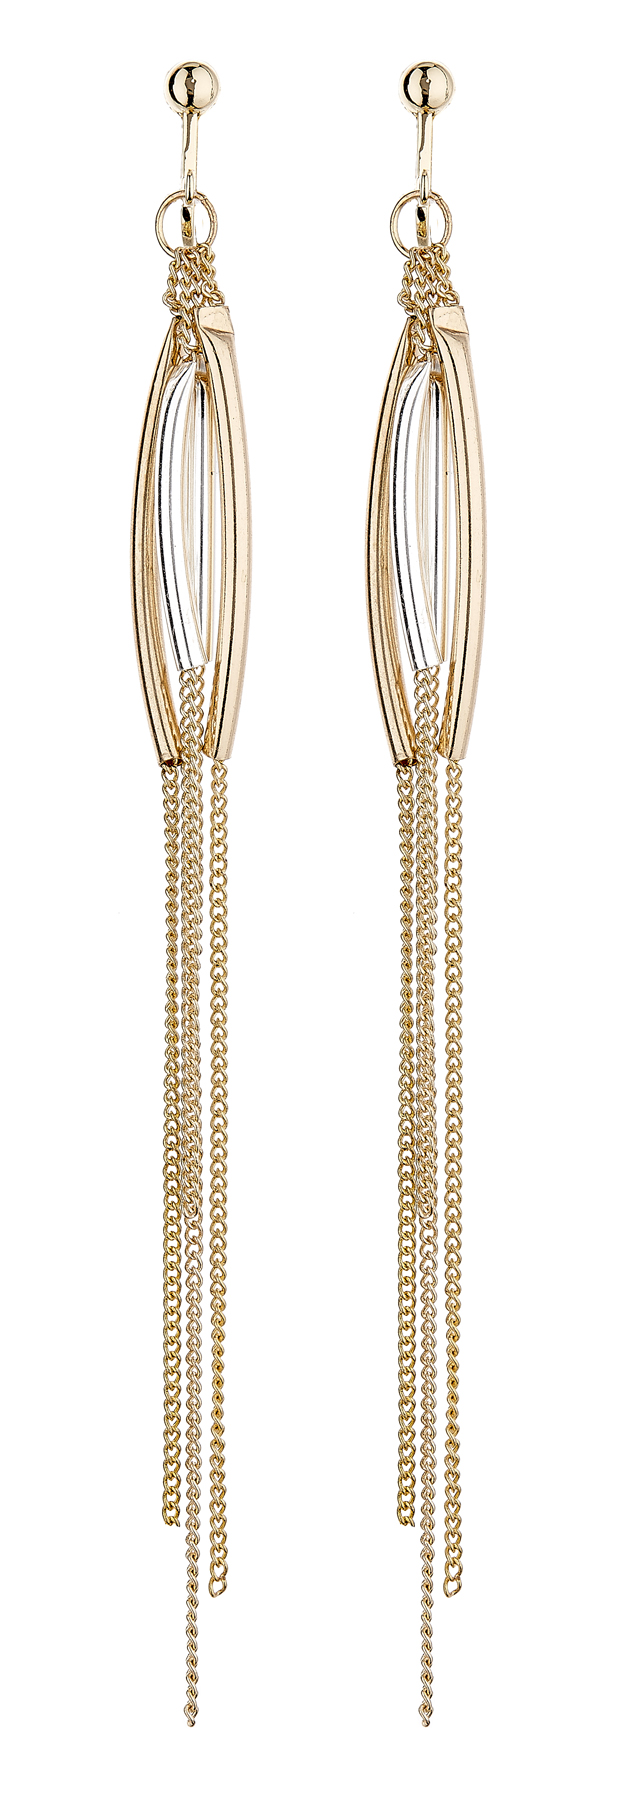 Clip On Earrings - Darcie - gold dangle earring with long chains